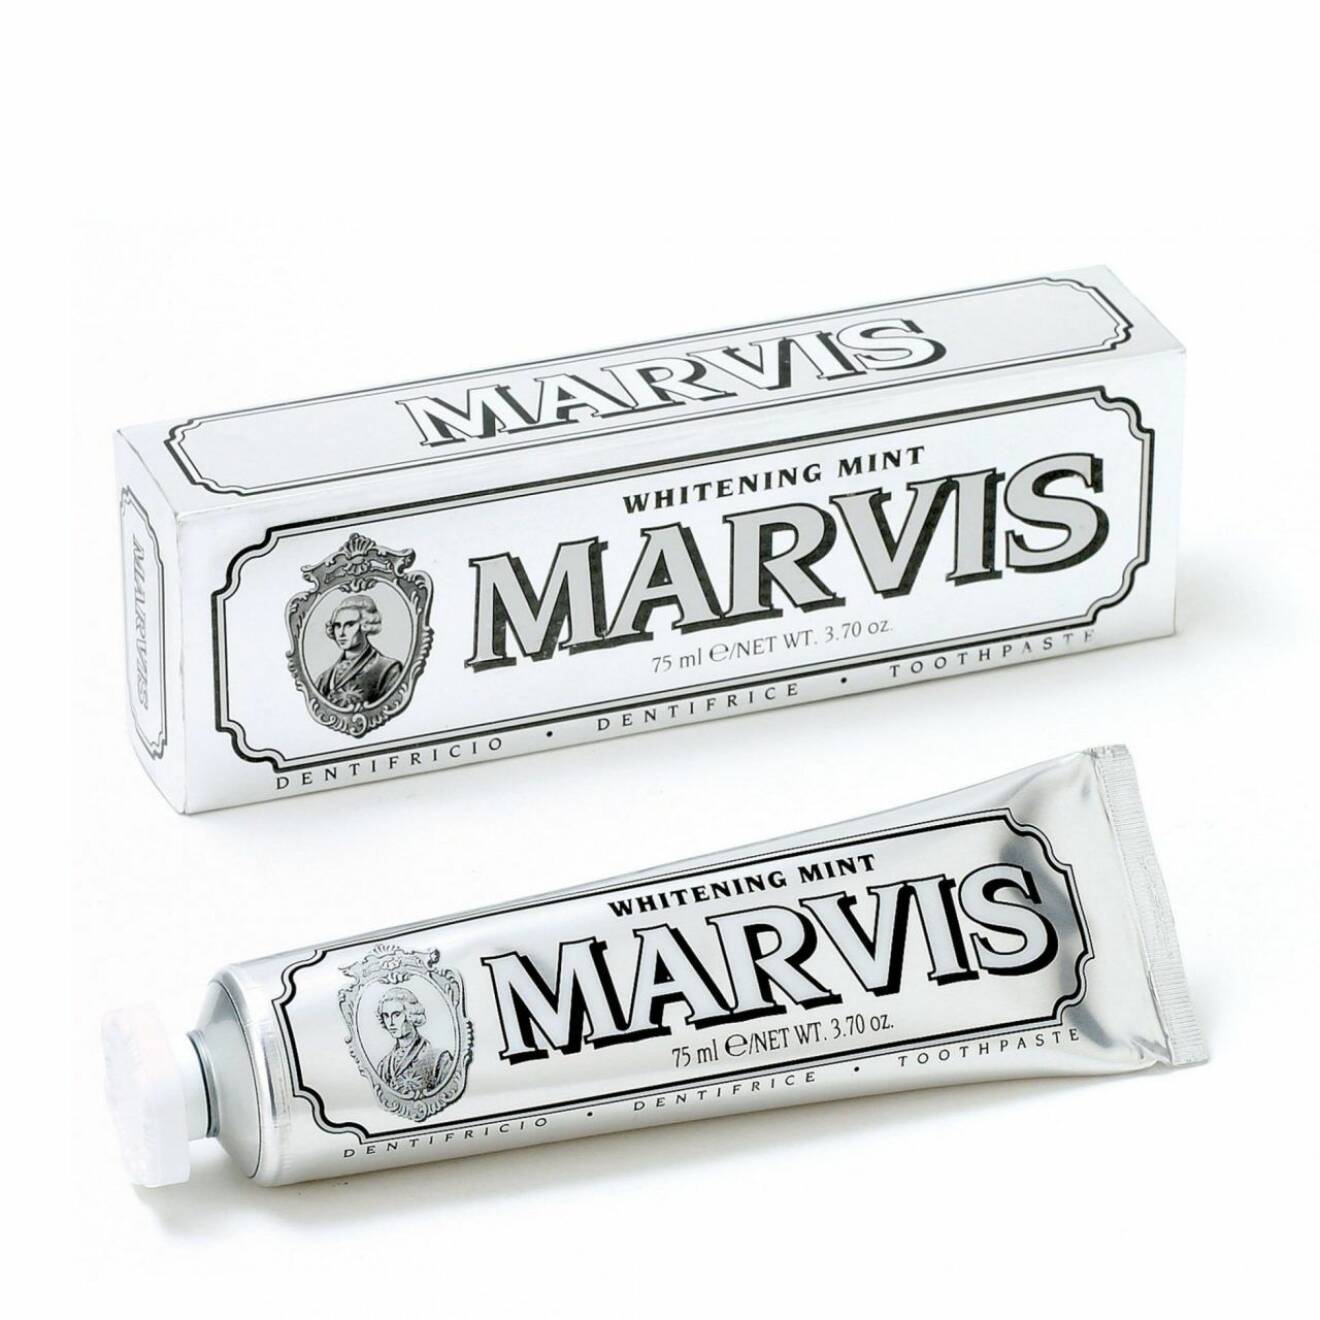 Marvis mint